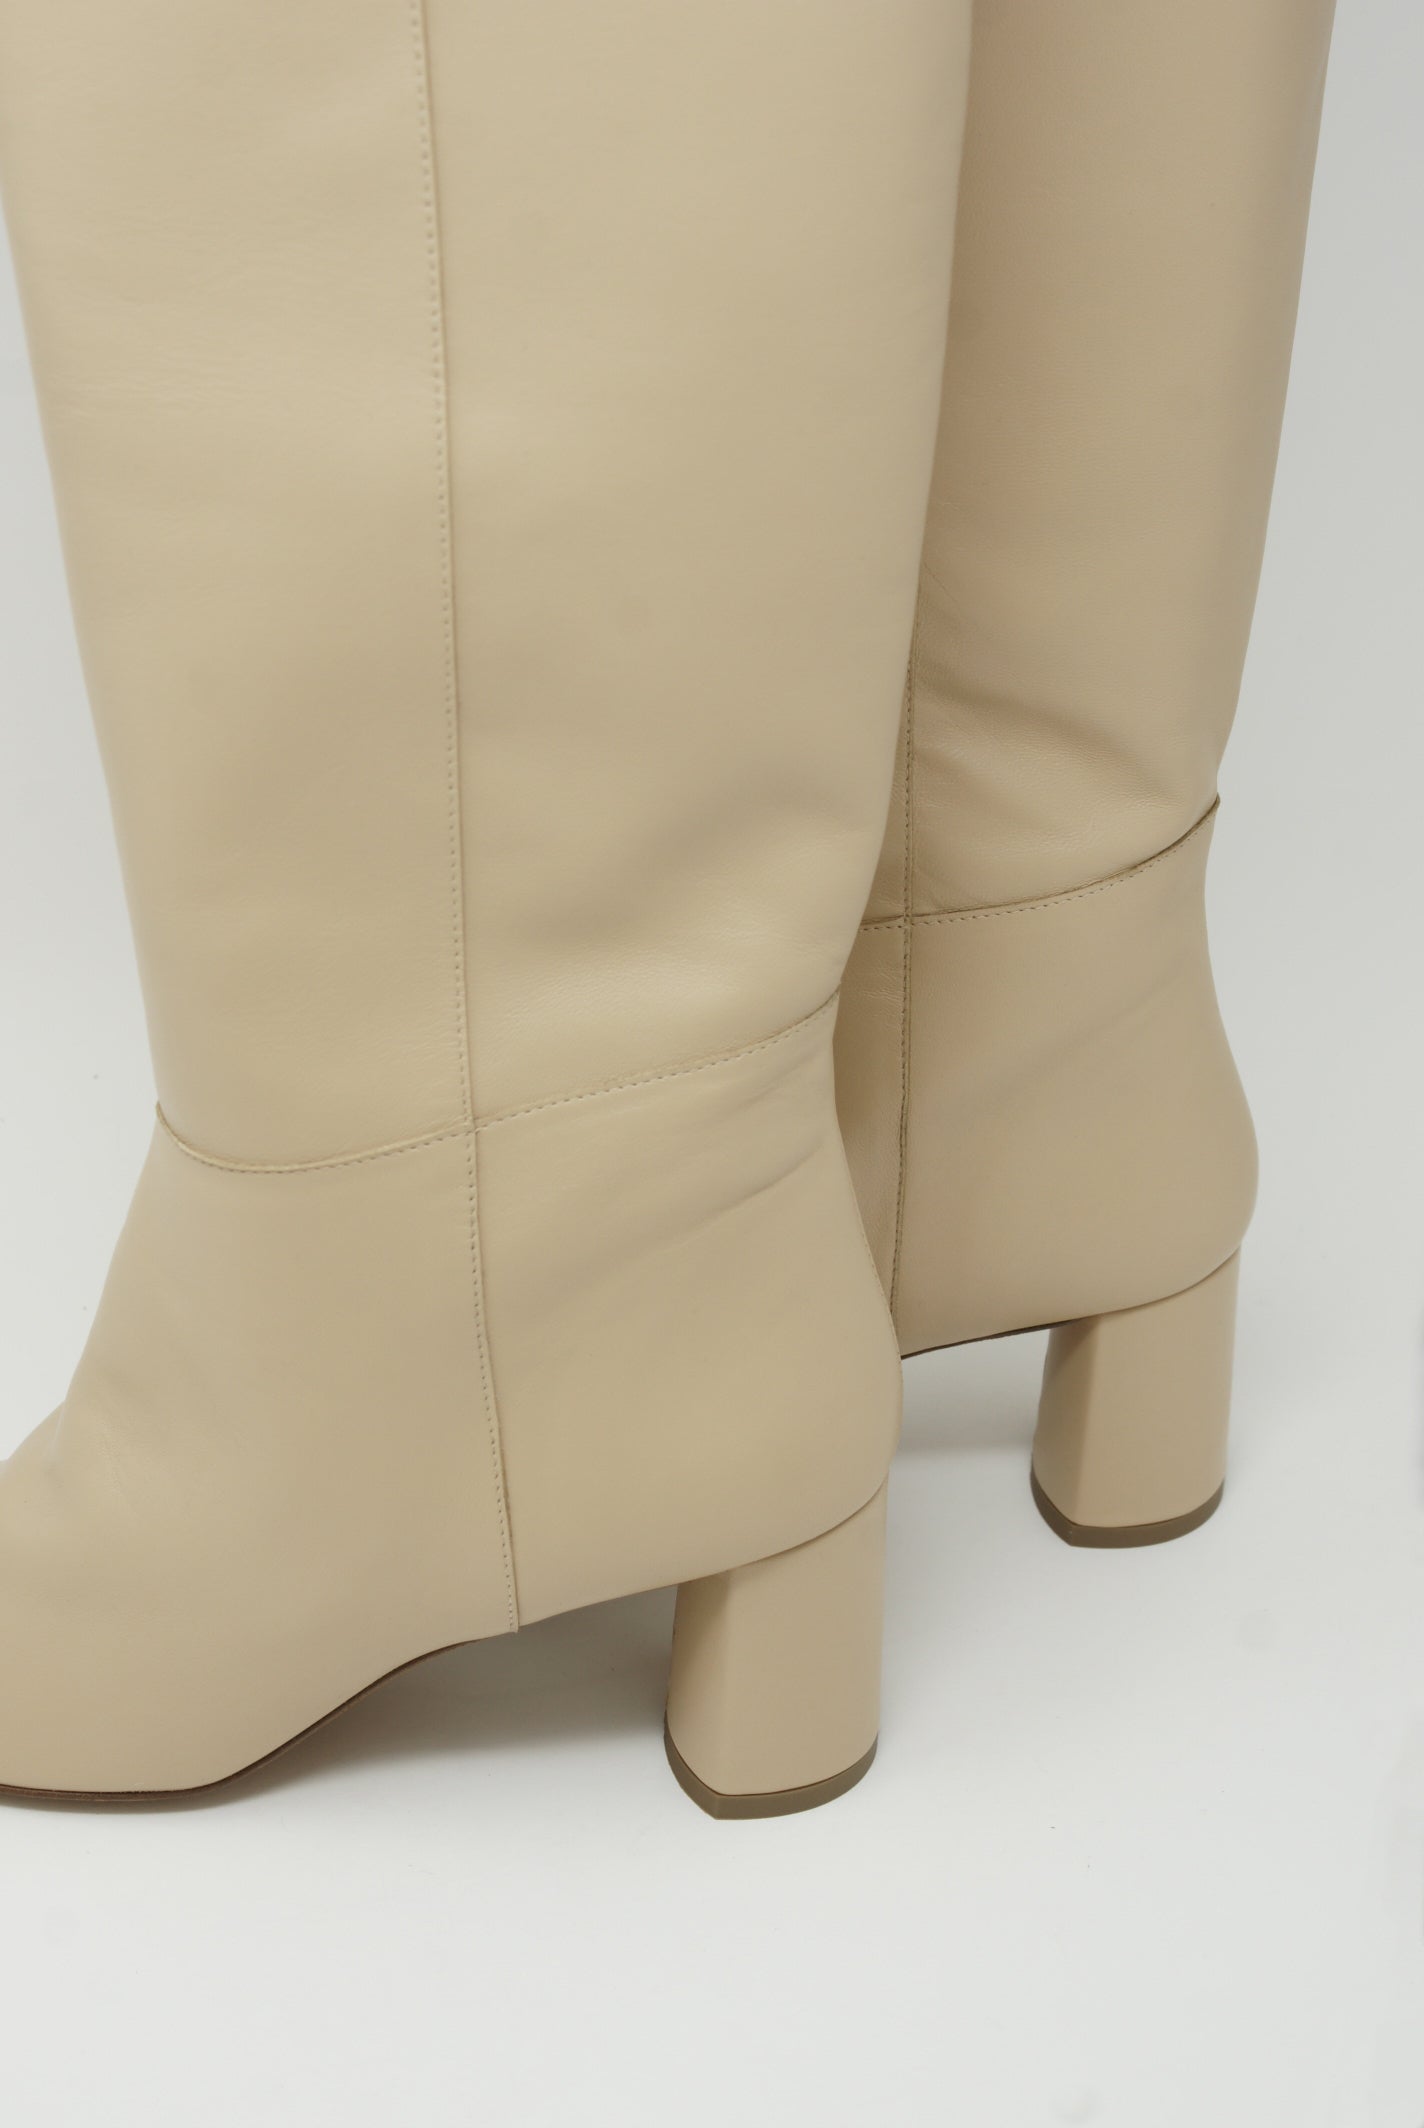 A pair of Donna Boots in Turrón from LOQ, knee-high leather boots from Spain with a block heel.